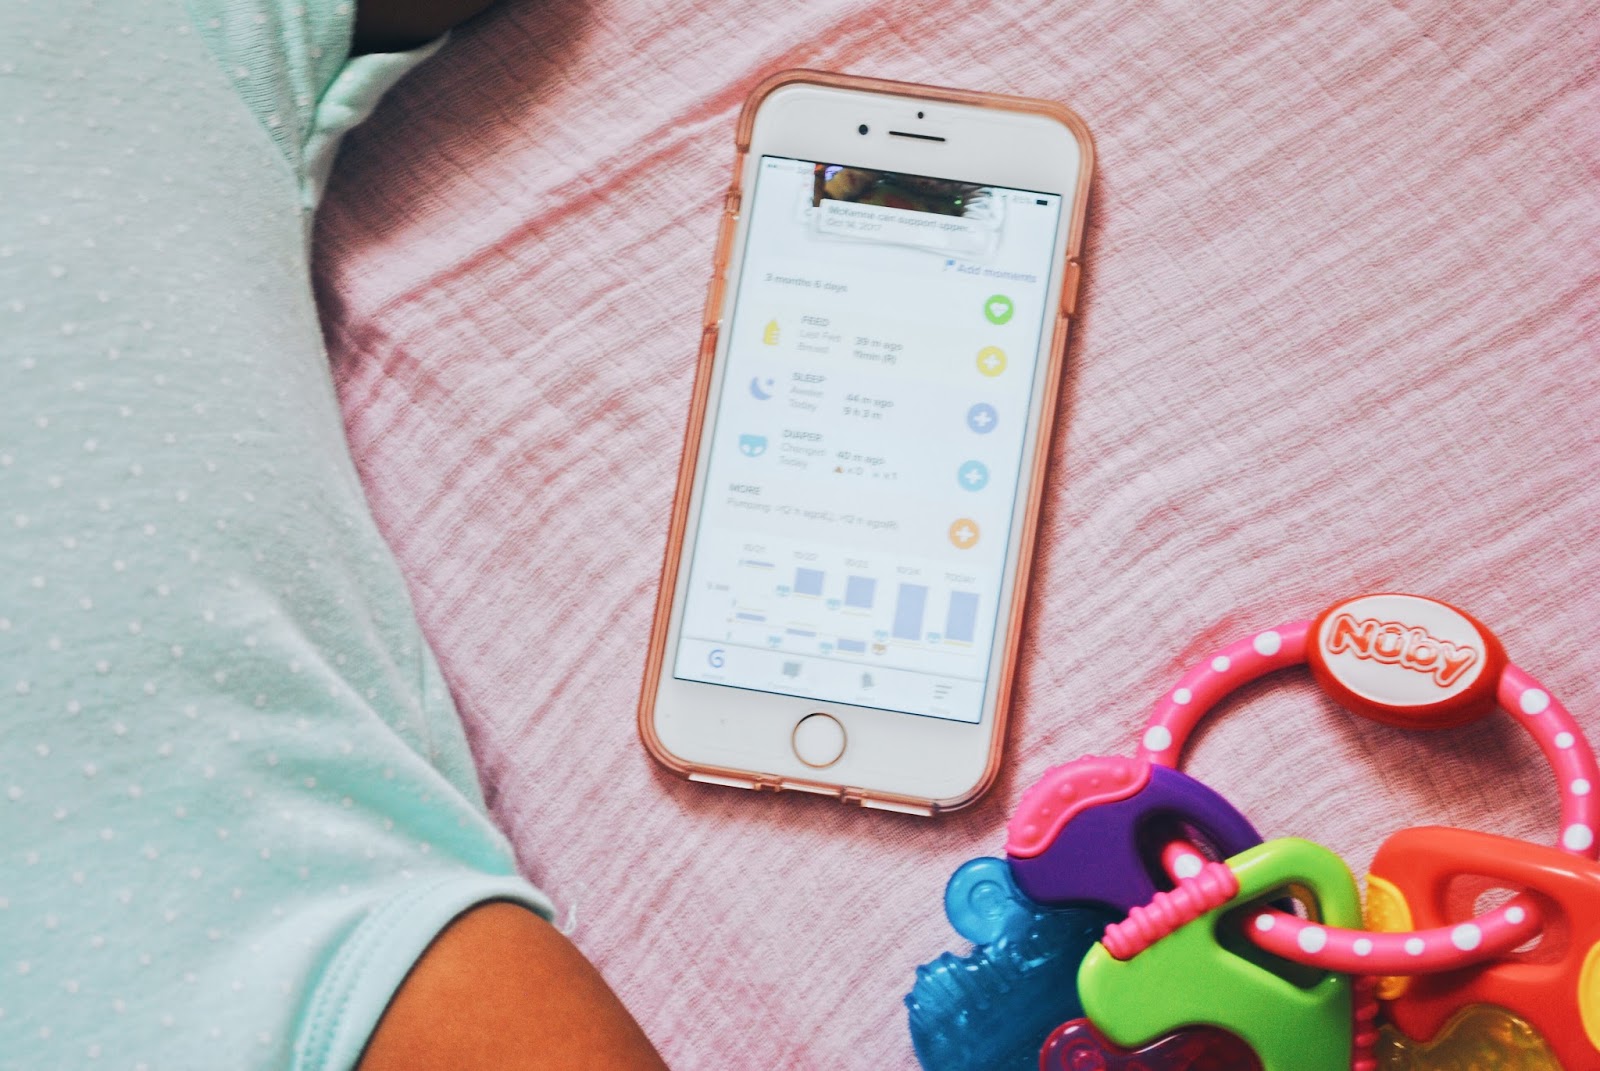 As a millennial, I'm pretty much attached to my phone 24/7. As a millennial parent, I use my phone for everything - taking and sending photos, researching symptoms, and scouring forums for other moms with the same issues. For the past three months I've relied on a few apps that make this motherhood job a little easier. Keep reading for a rundown of my favorite apps for new moms!